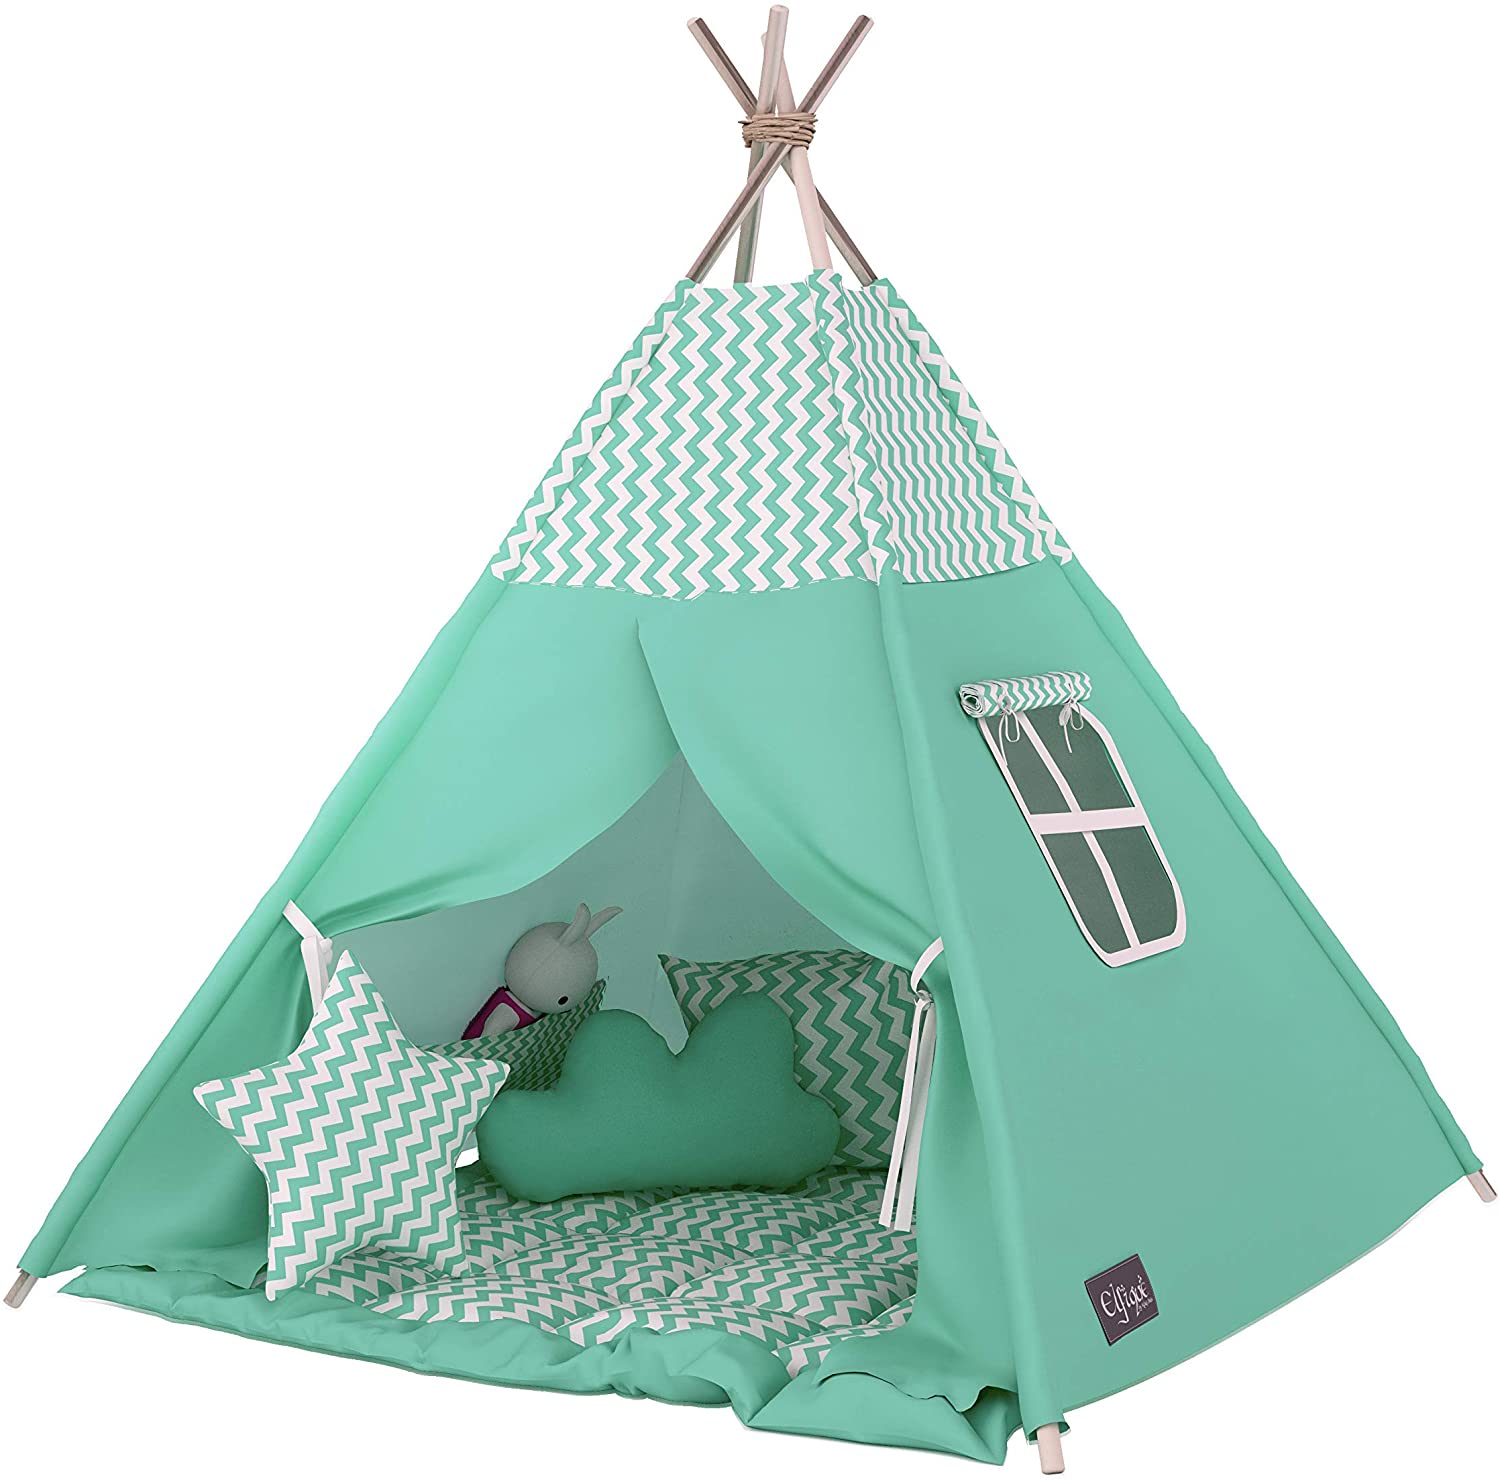 Elfique Teepee Indian Tent, Play Tent, Double Padded Blanket